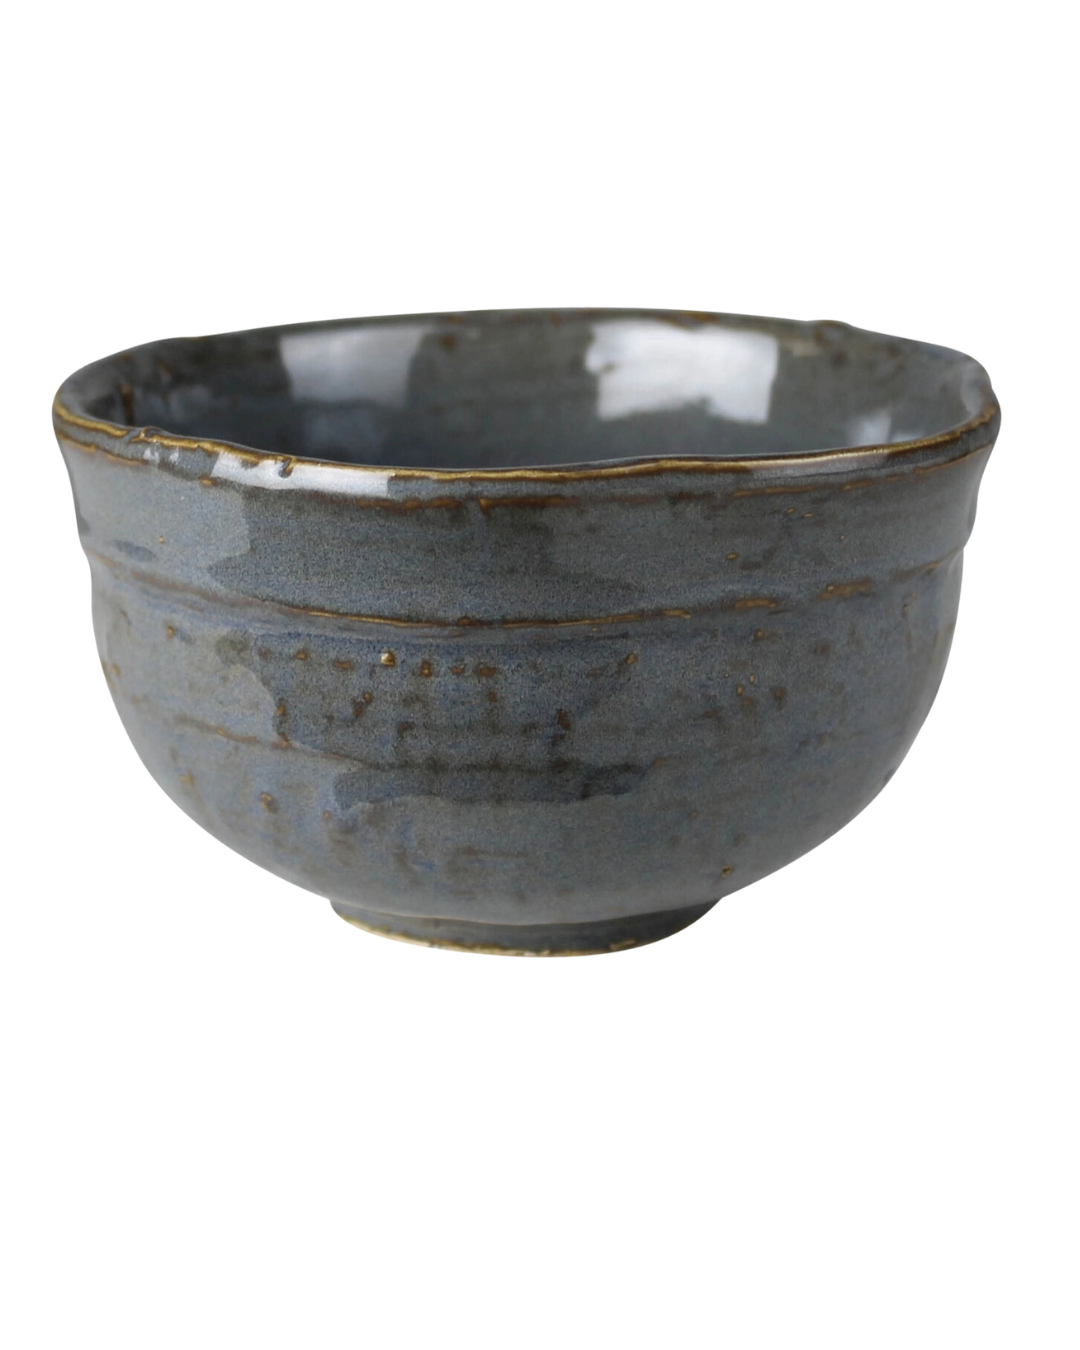 The HomArt Beckman Ceramic Bowl Small with a glazed blue finish and subtle brown accents along the rim and sides, isolated on a white background, epitomizes Arizona style.